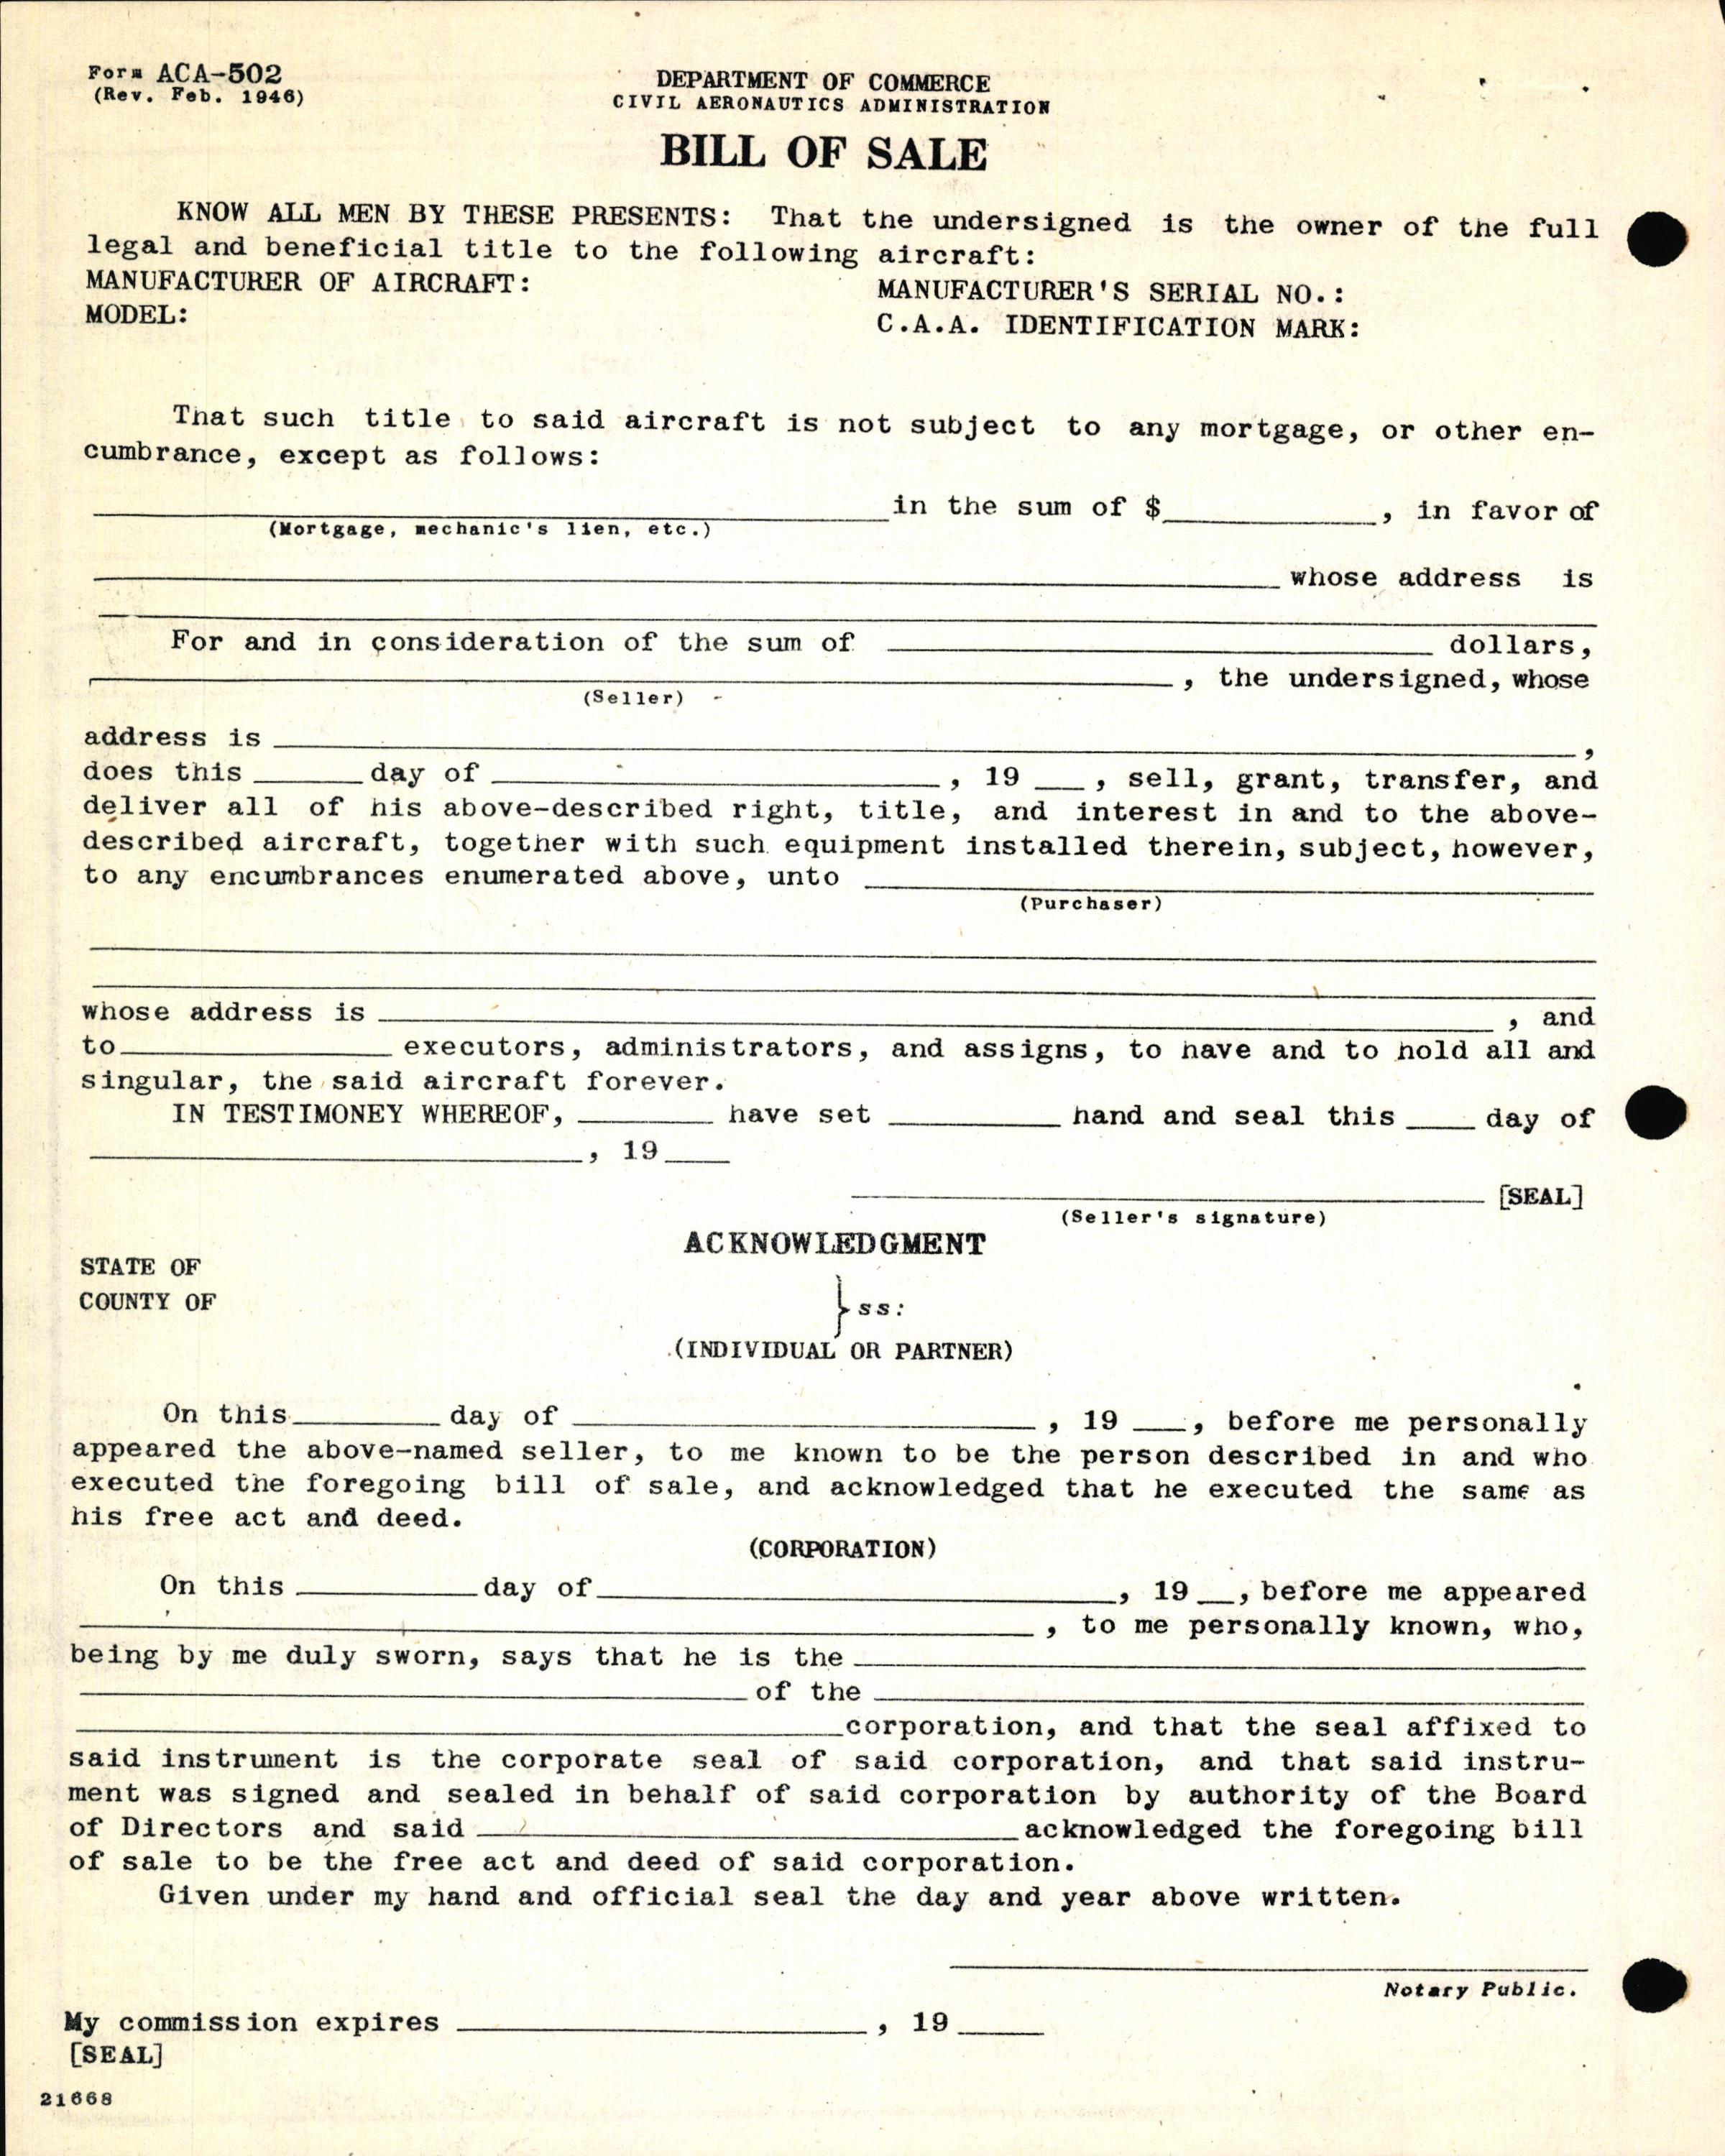 Sample page 6 from AirCorps Library document: Technical Information for Serial Number 1200